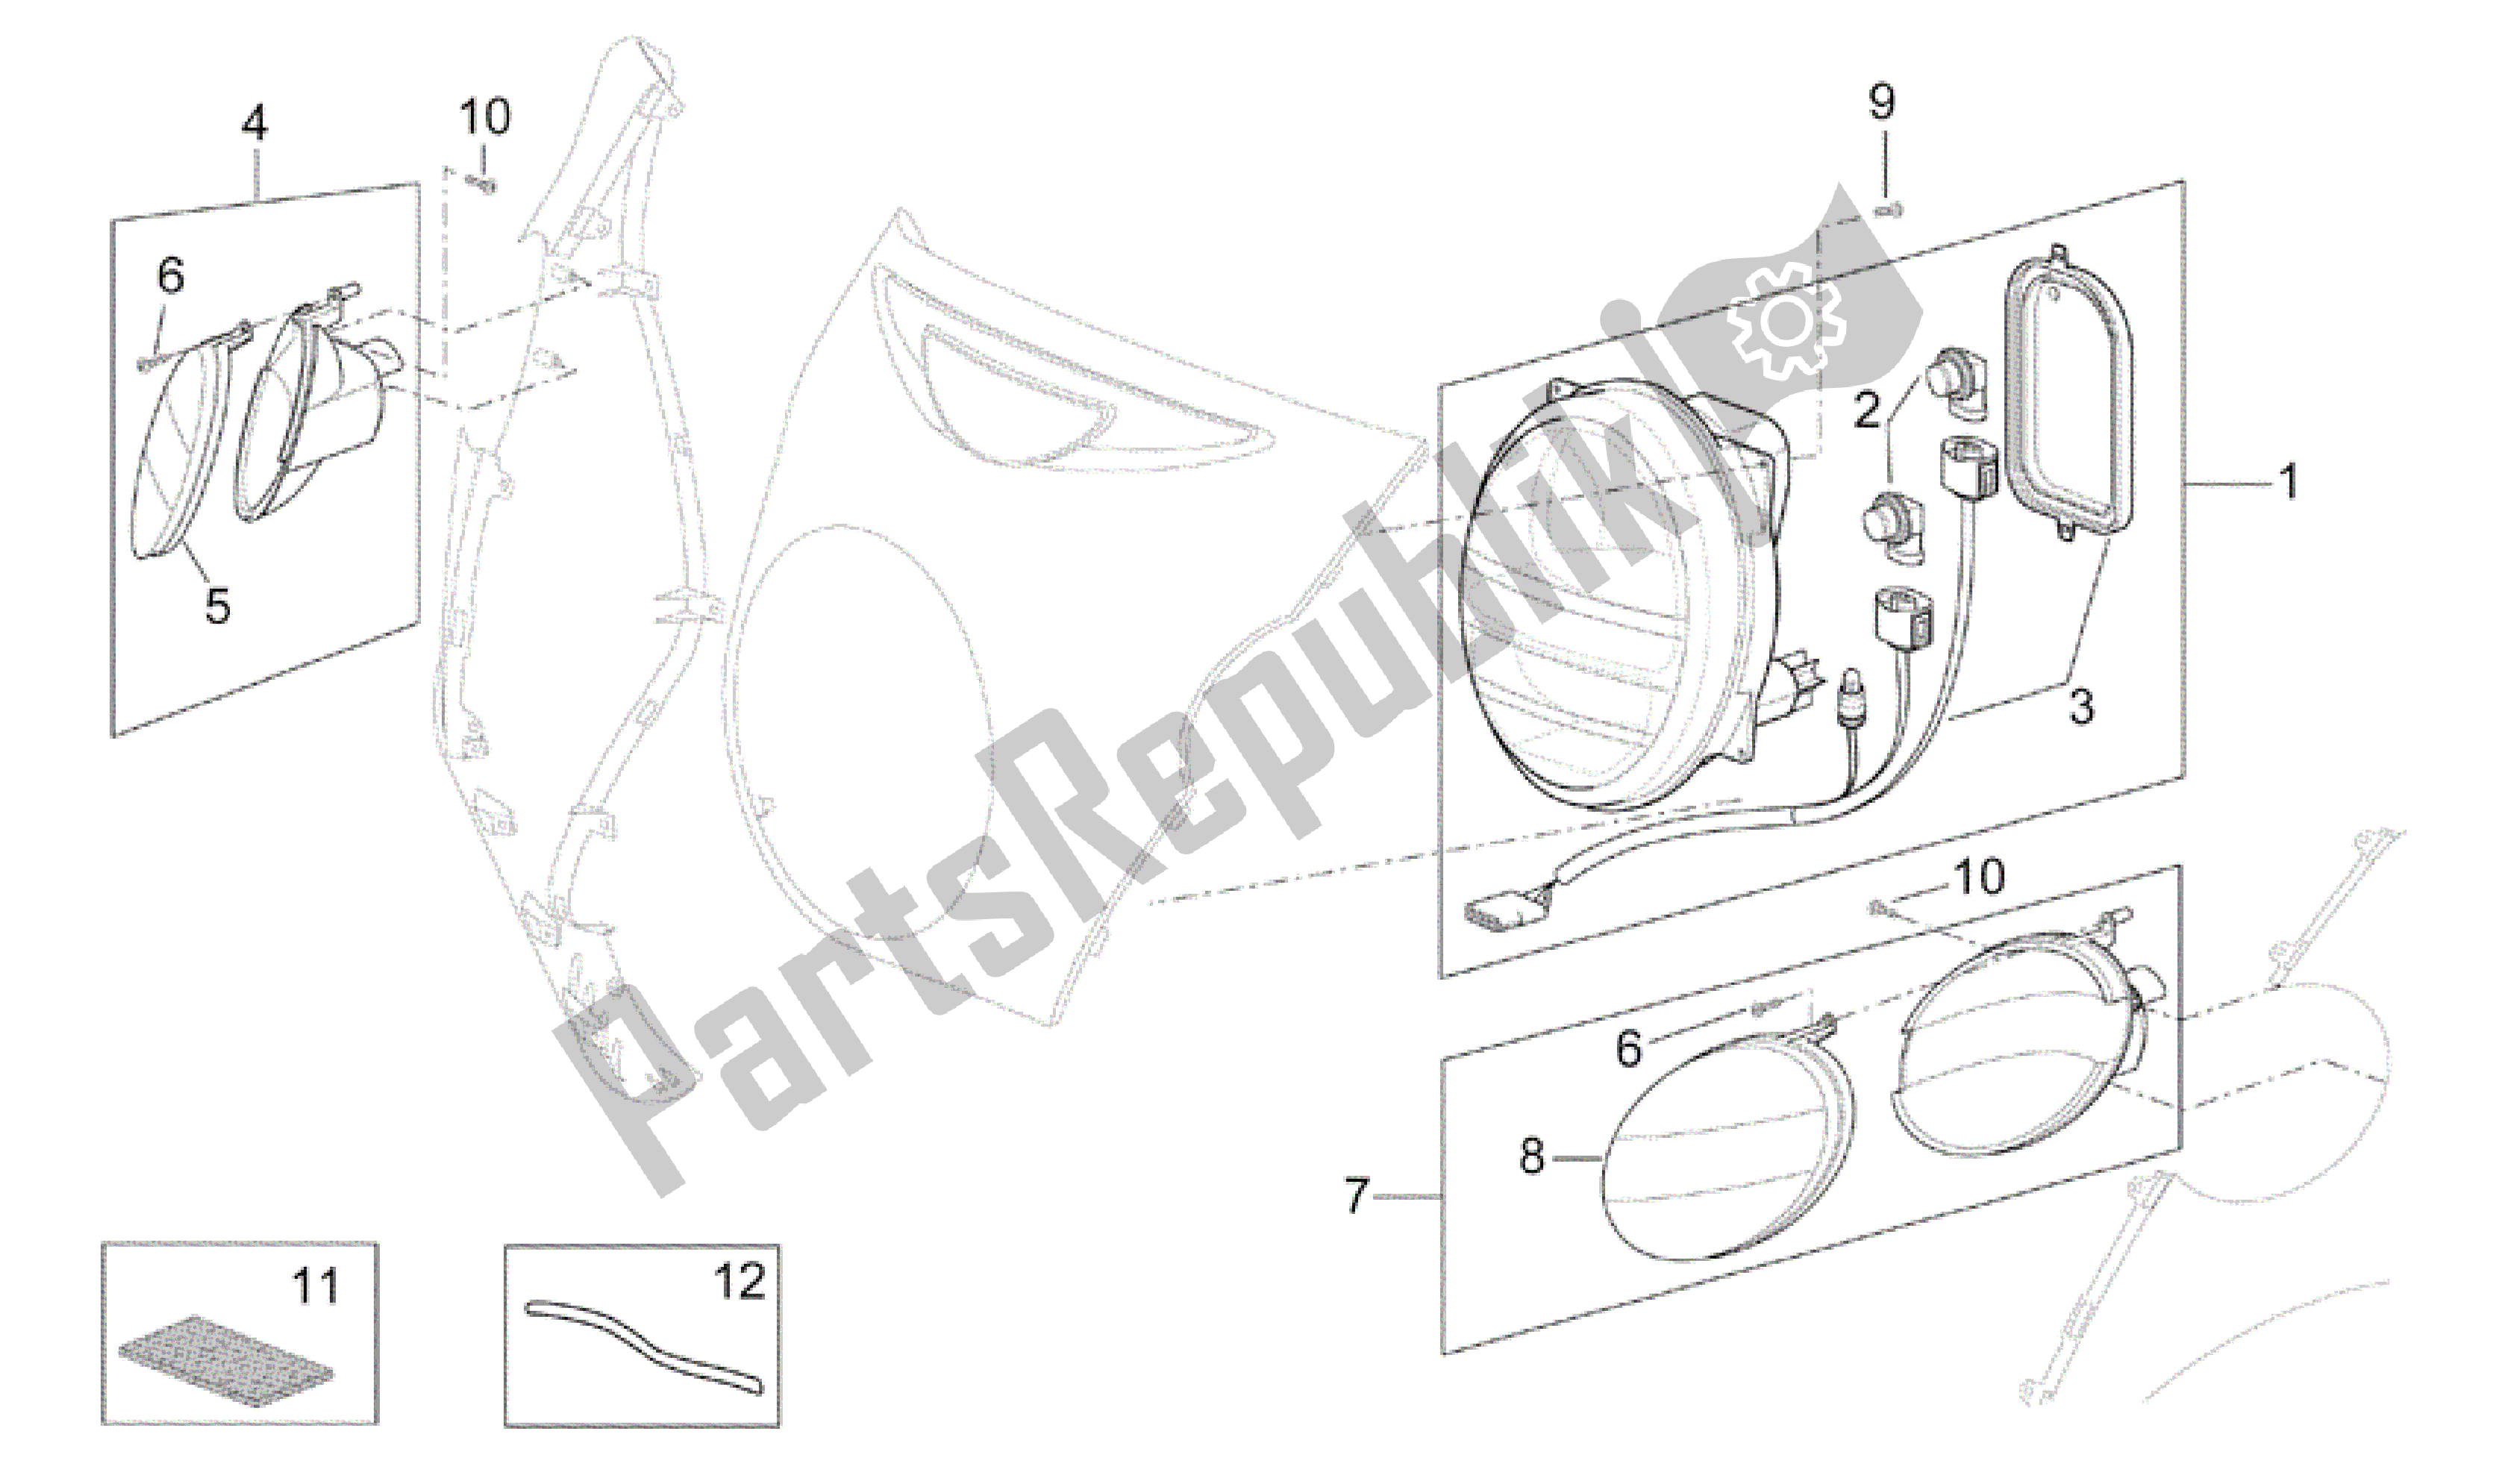 All parts for the Front Lights of the Aprilia Scarabeo 500 2003 - 2006